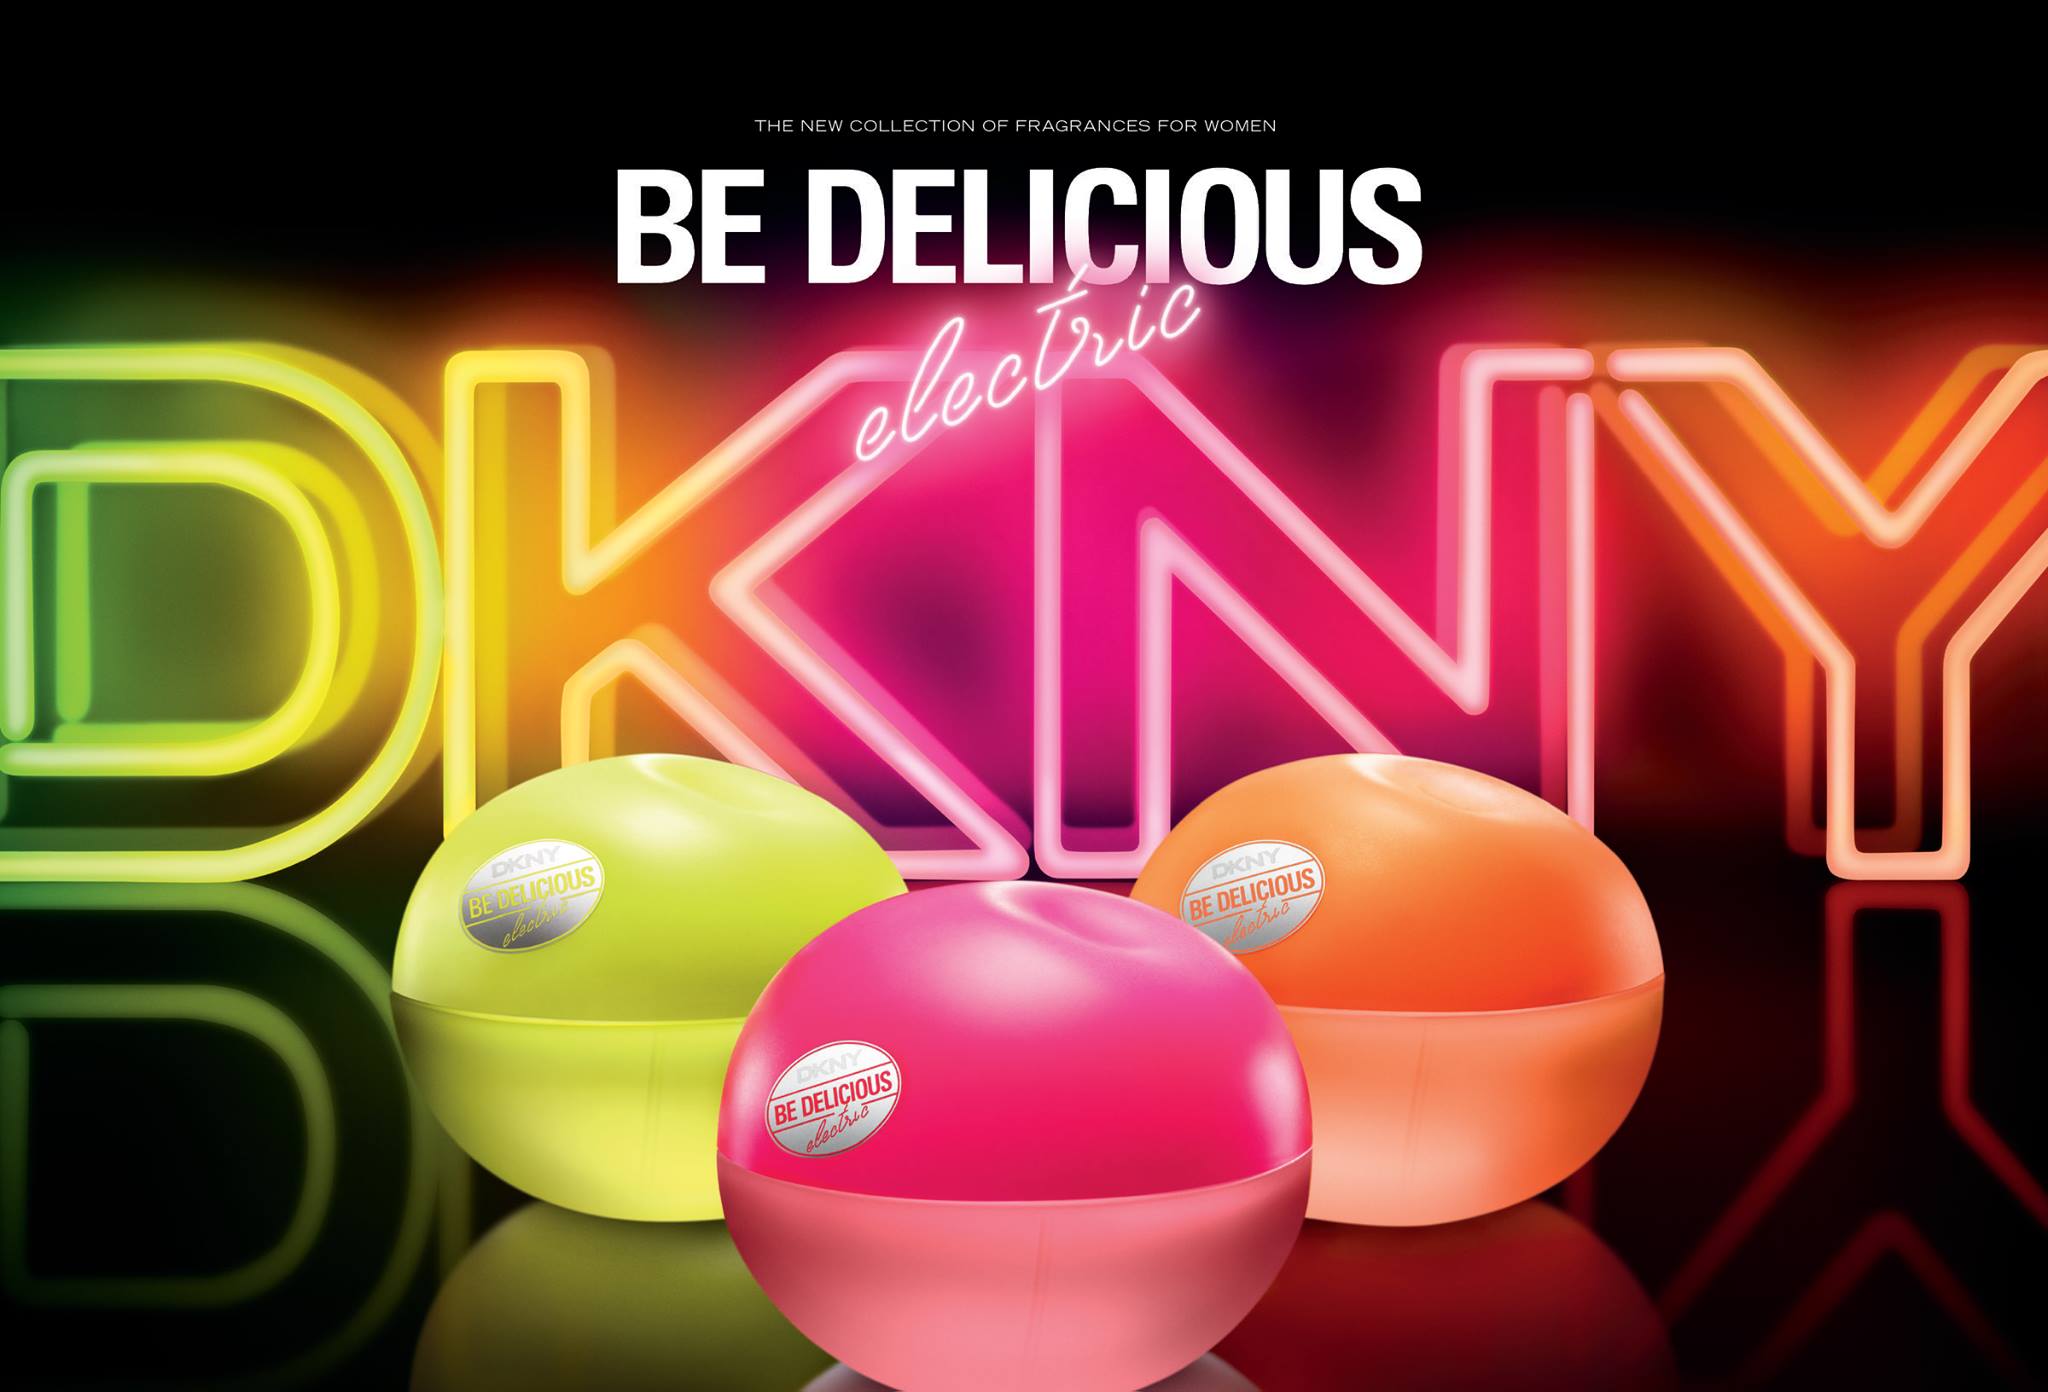 DKNY Be Delicious Electric Loving Glow